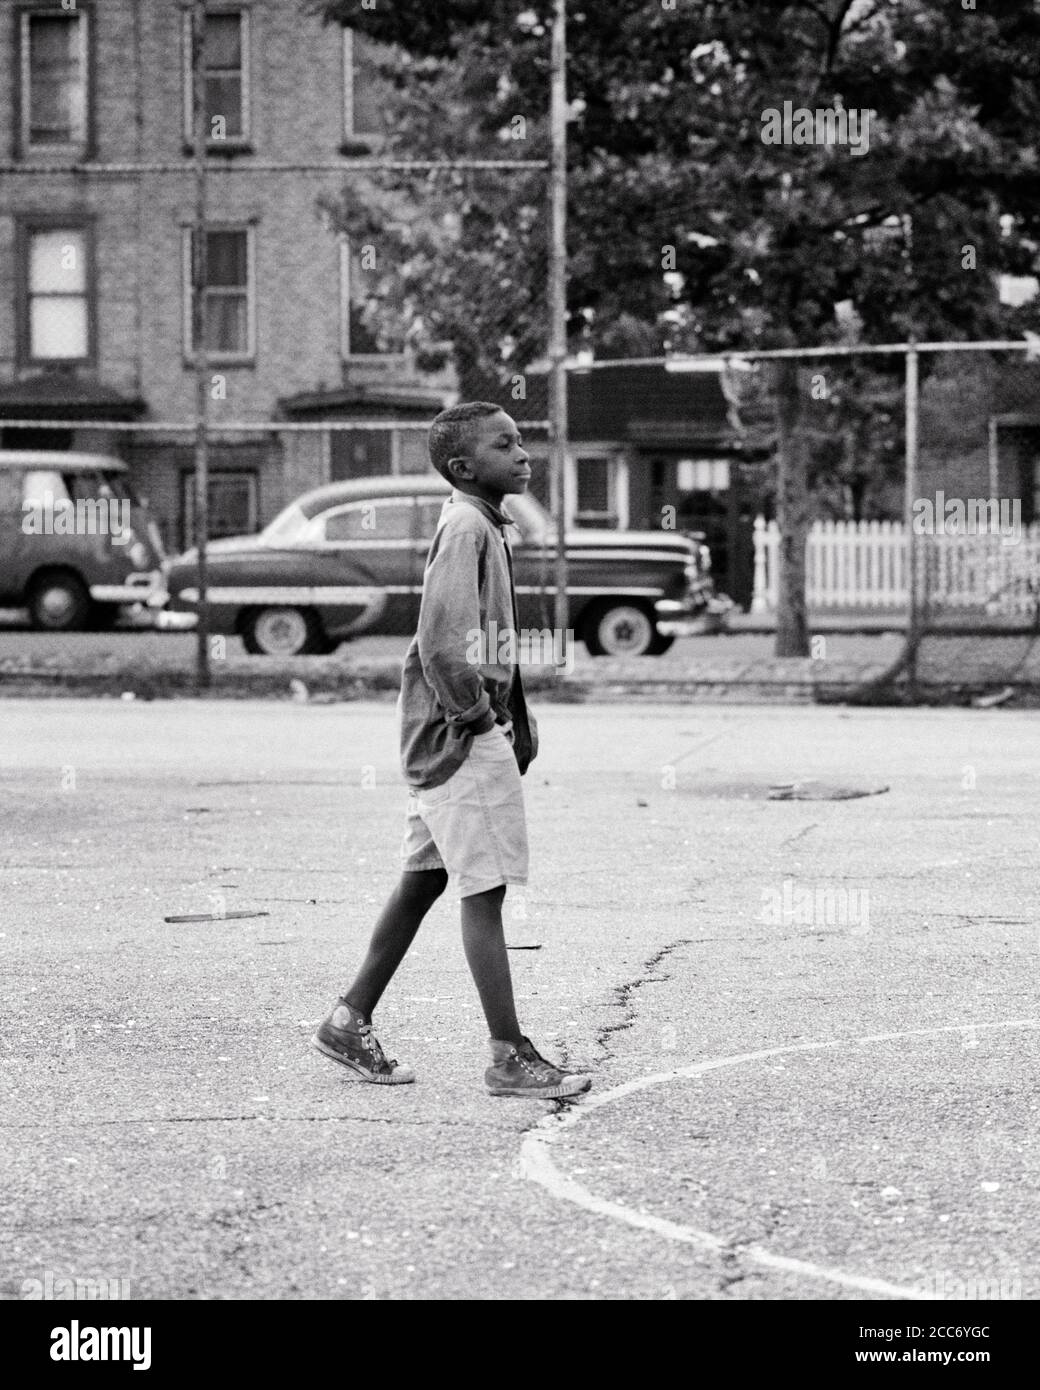 1960s 1970s ANONYMOUS ALONE AIMLESS AFRICAN-AMERICAN YOUNG MAN WALKING ACROSS ASPHALT CITY PLAYGROUND HANDS IN POCKETS NYC USA - w5858 HAR001 HARS COMMUNITY URBAN DEPRESSION OLD TIME FUTURE NOSTALGIA OLD FASHION 1 JUVENILE STYLE FEAR SECURITY PEACE SAFETY COMPETITION WORRY LIFESTYLE MOODY POOR HEALTHINESS HOME LIFE POCKETS UNITED STATES COPY SPACE FULL-LENGTH PERSONS INSPIRATION UNITED STATES OF AMERICA MALES RISK TEENAGE BOY SNEAKERS CONFIDENCE TROUBLED B&W CONCERNED SADNESS NORTH AMERICA FREEDOM NORTH AMERICAN TEMPTATION DREAMS WELLNESS STRENGTH AFRICAN-AMERICANS AFRICAN-AMERICAN RECREATION Stock Photo